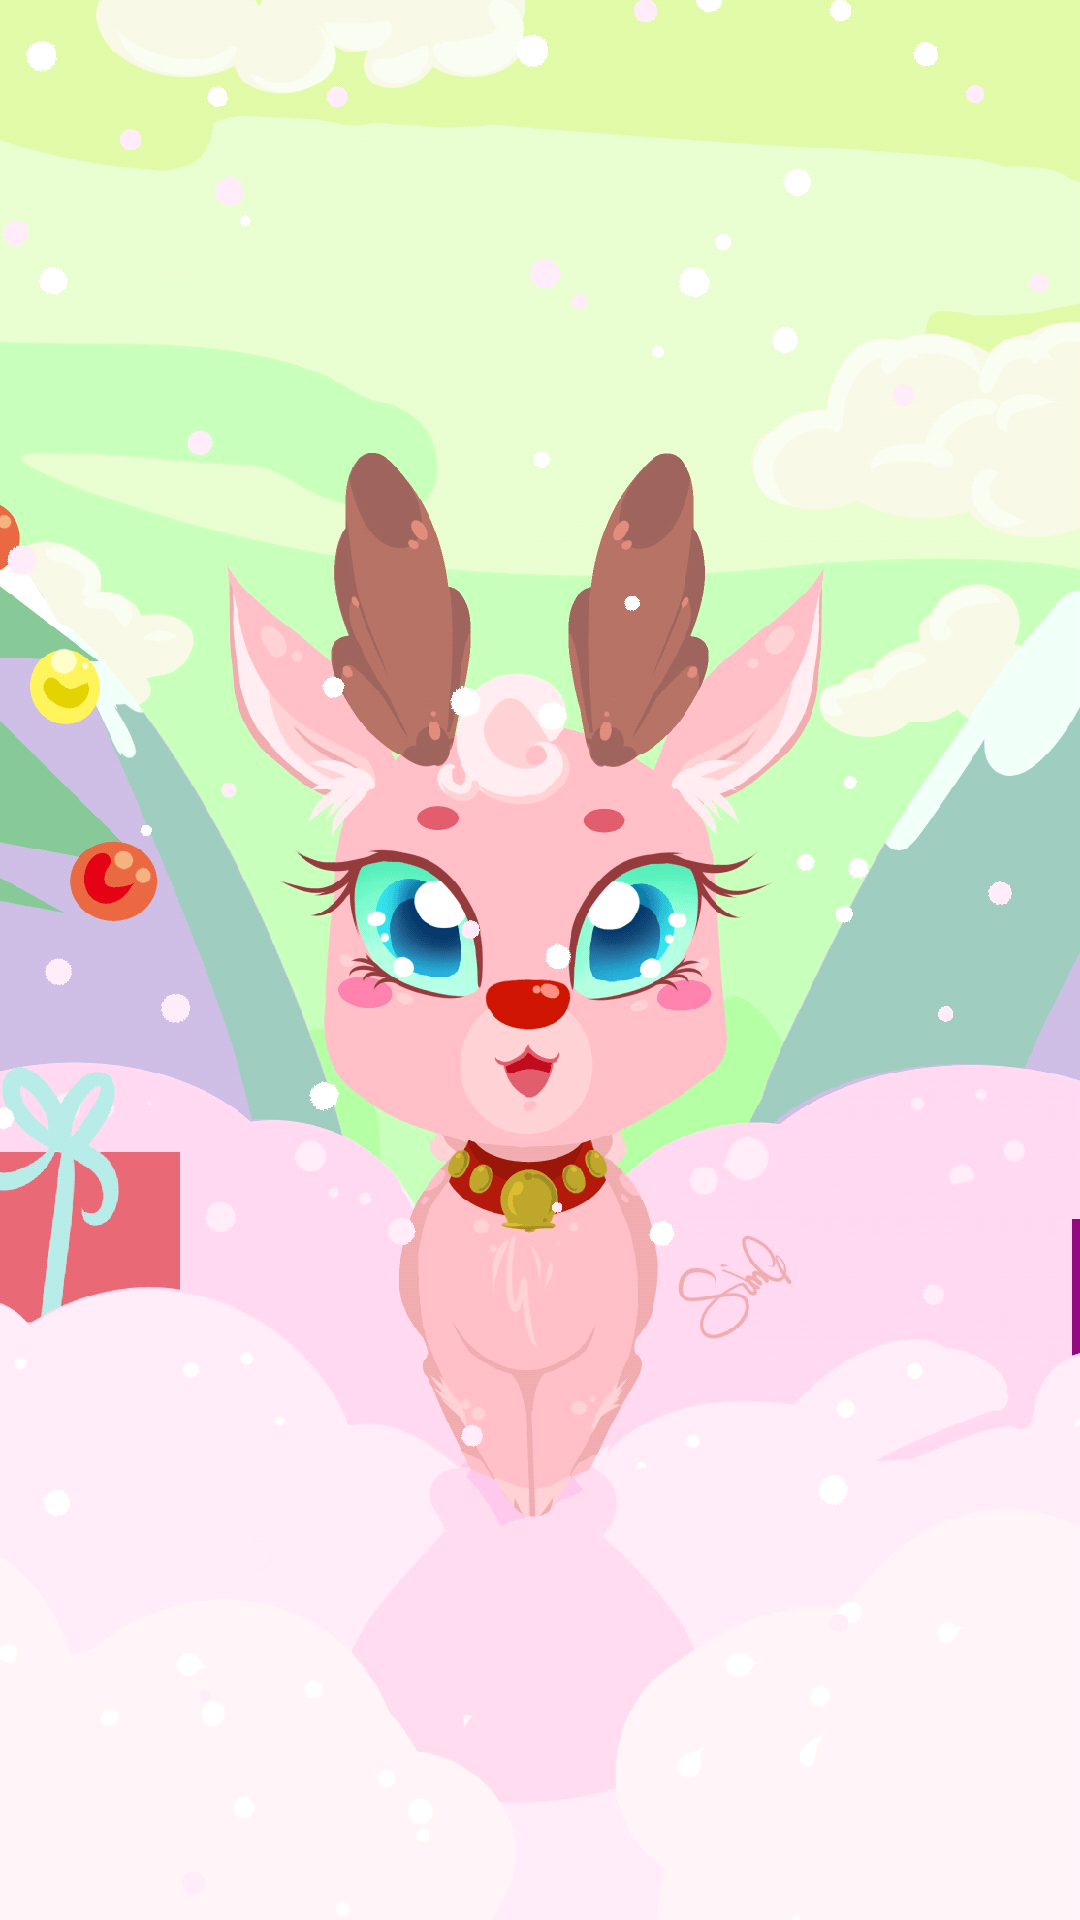 Reindeer Cute Live Wallpaper For Android